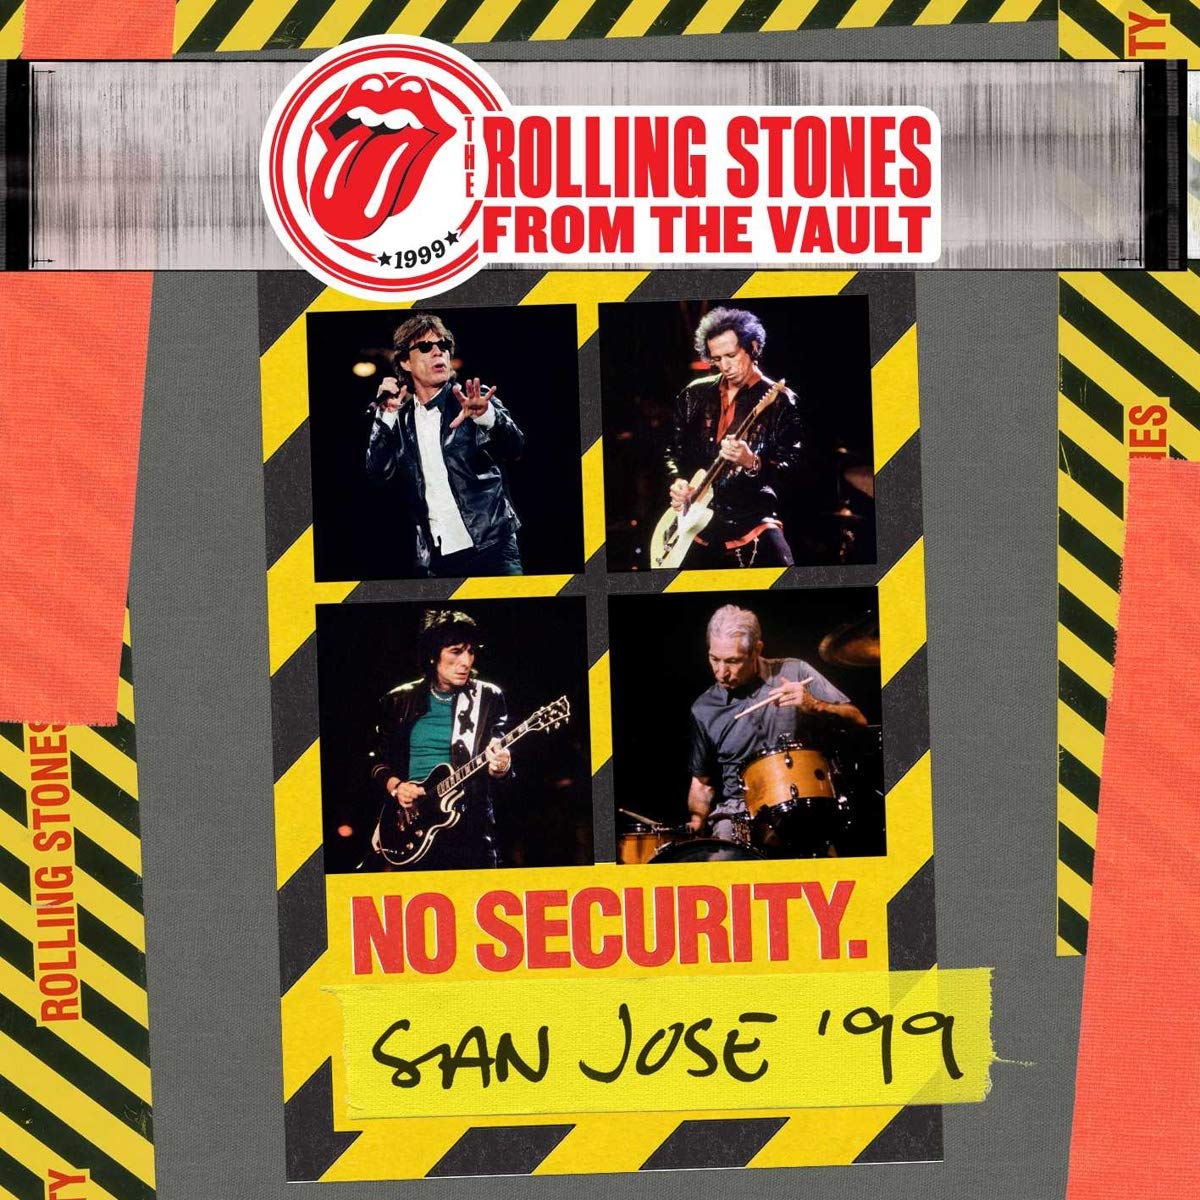 The Rolling Stones — From The Vault: No Security